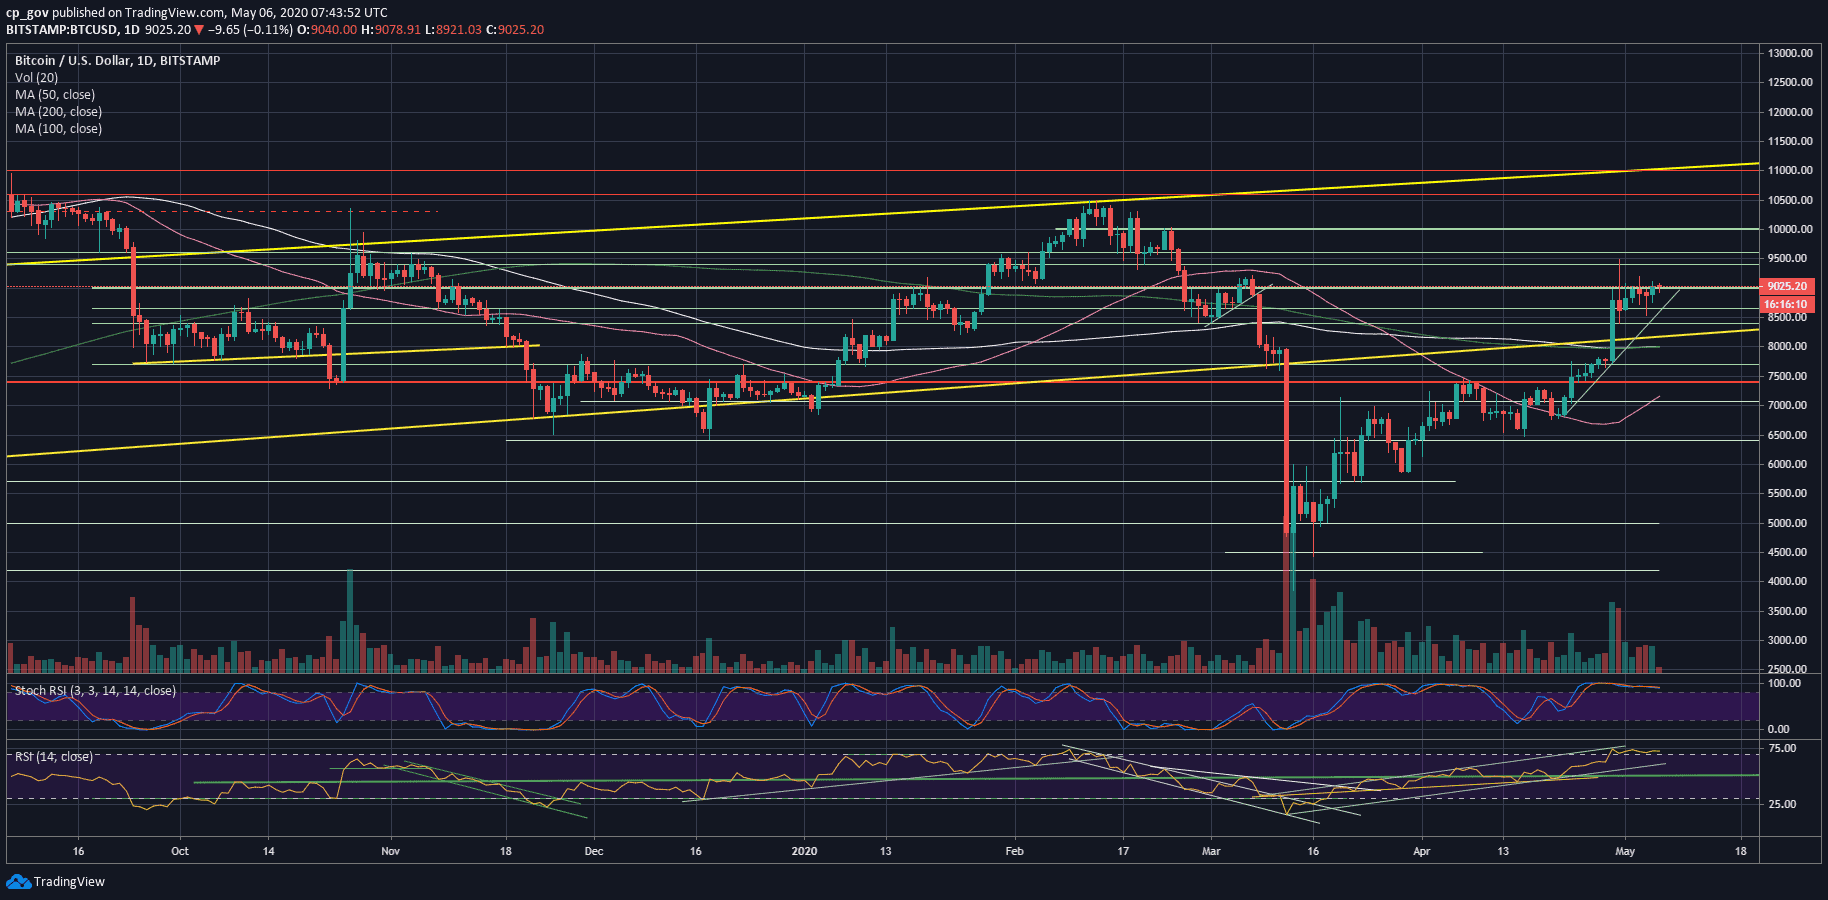 Bitcoin Price Analysis: The Triangle Formation Can Send BTC To $10K Or $8K, Breakout Soon? (UPDATED)